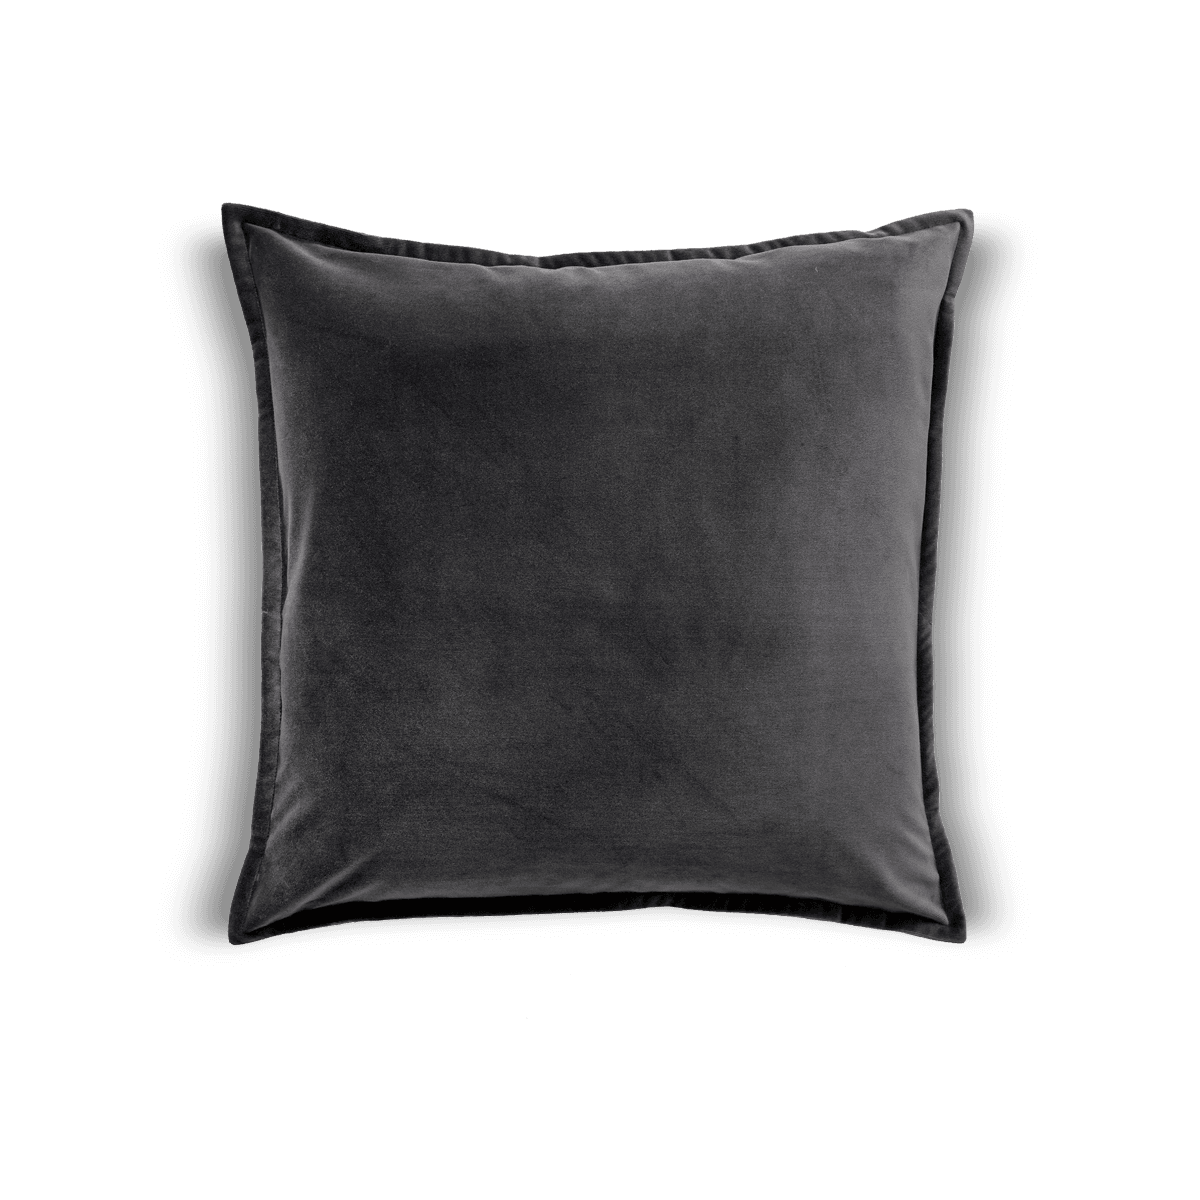 Cushion Alessandra Steele With Filler,Black